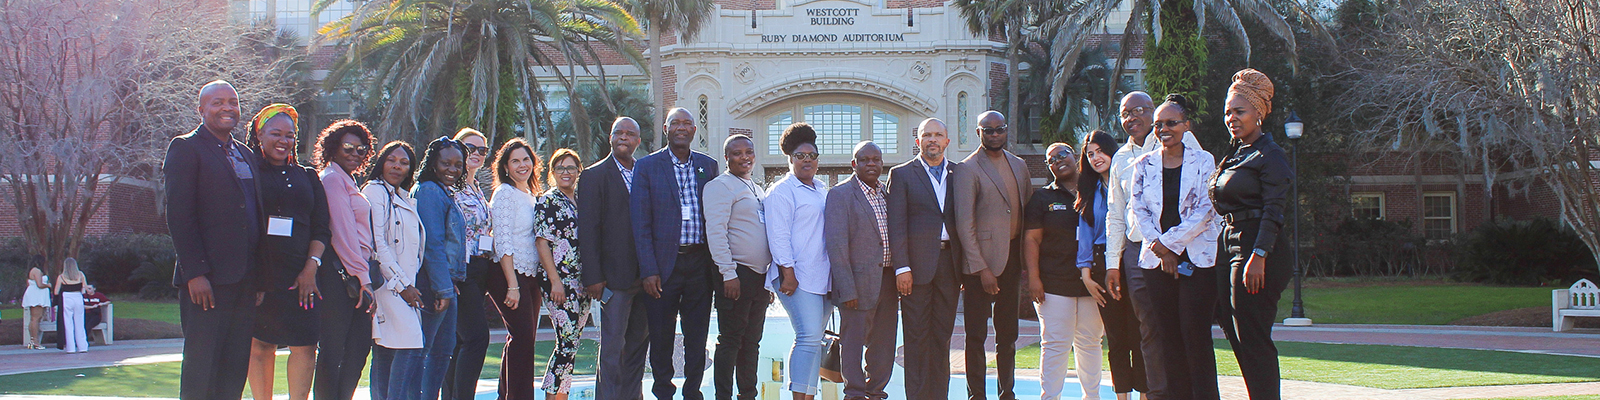 "Group photo of South African educators participating in CCAP in front of the Florida State Westcott fountain."